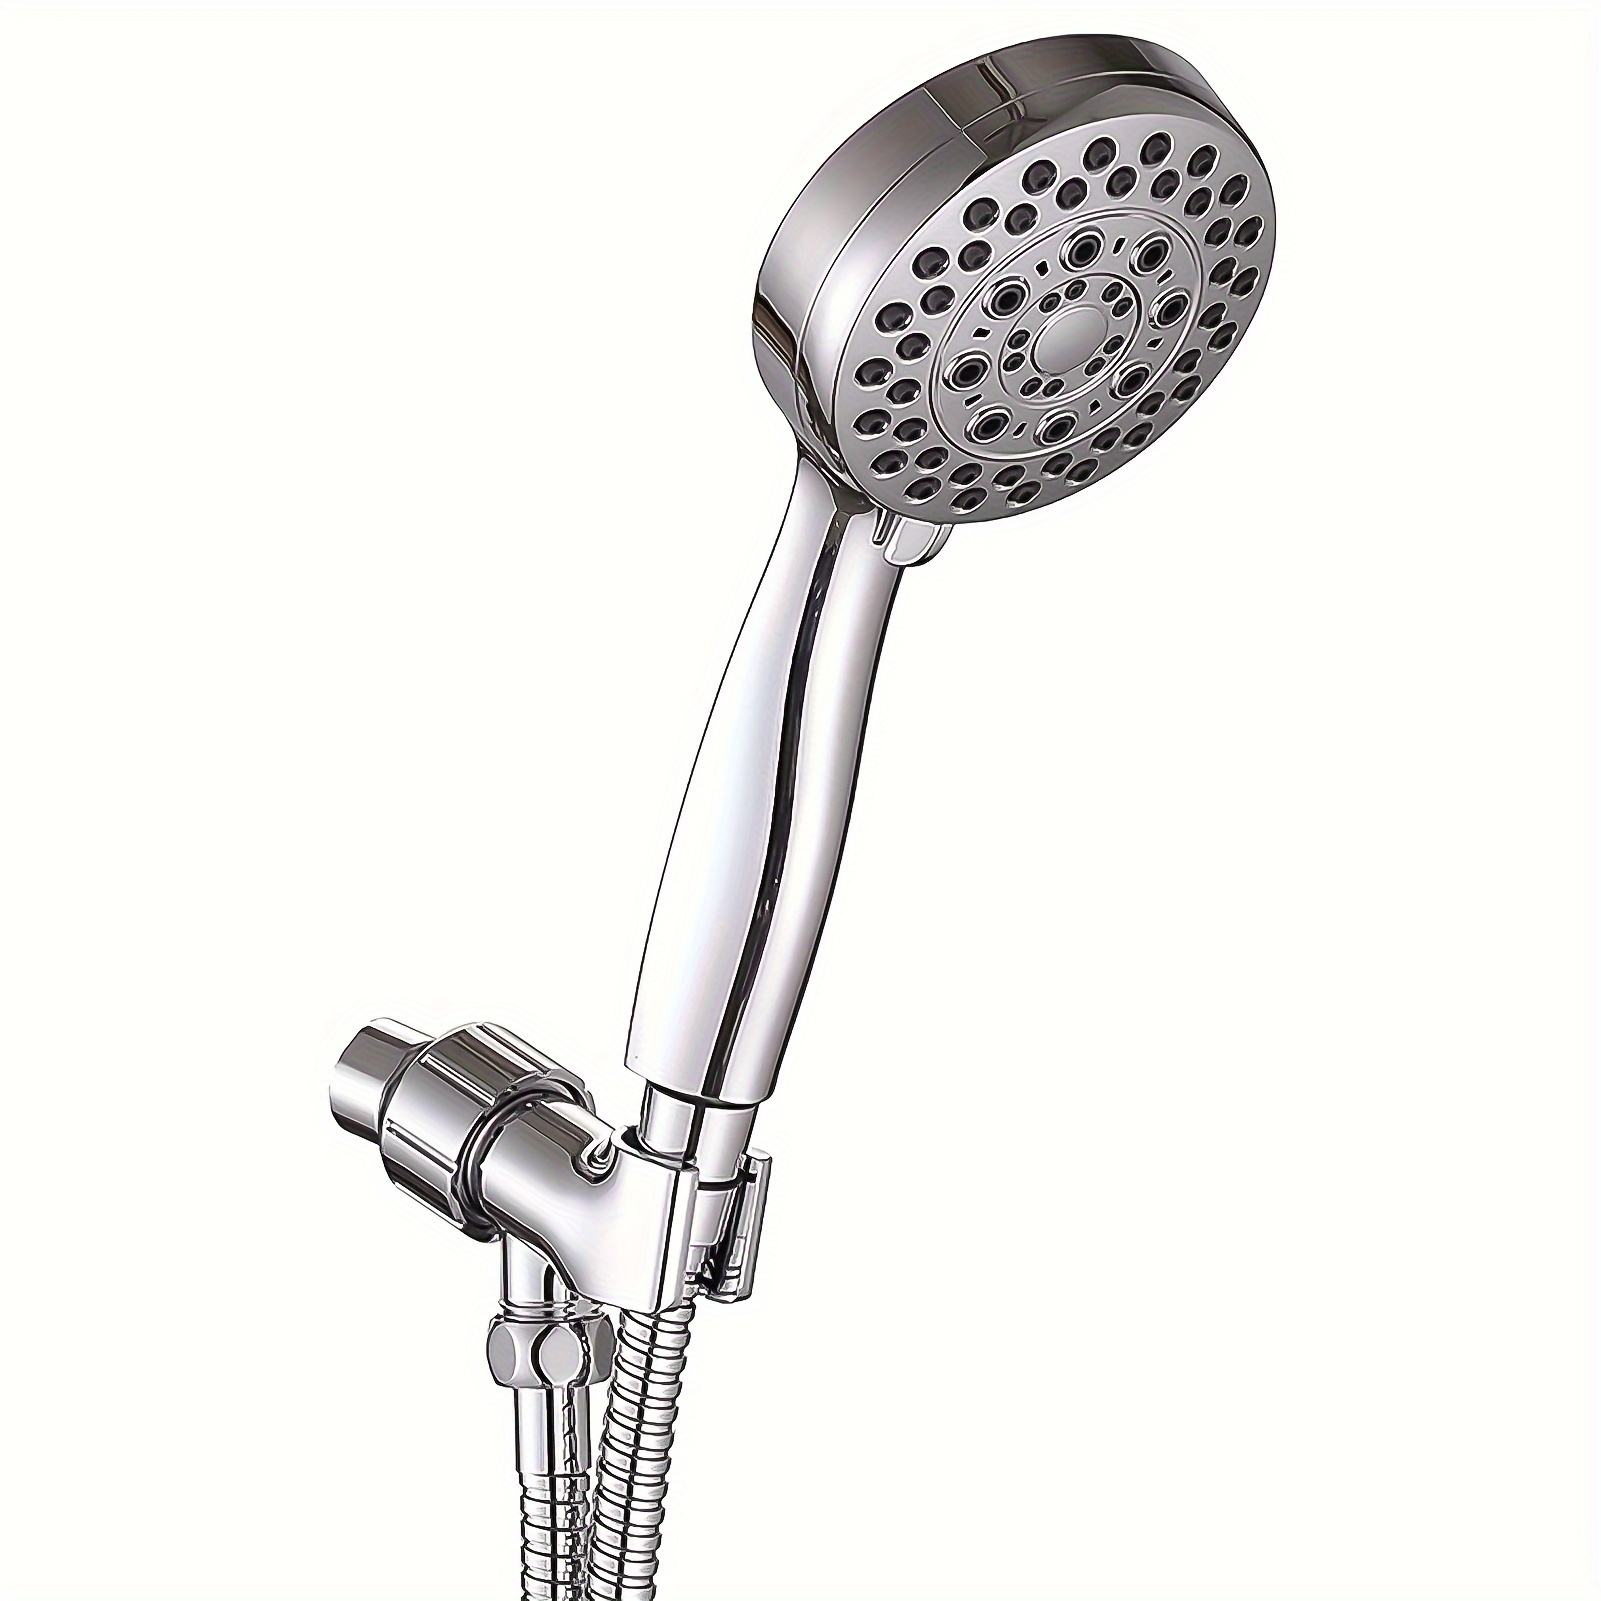 

5-setting Shower Head With Handheld, High Pressure Hand Held Shower Head, 4 Inch Chrome Detachable Showerhead Set With 59 Inch Stainless Steel Hose And Adjustable Showerhead Holder